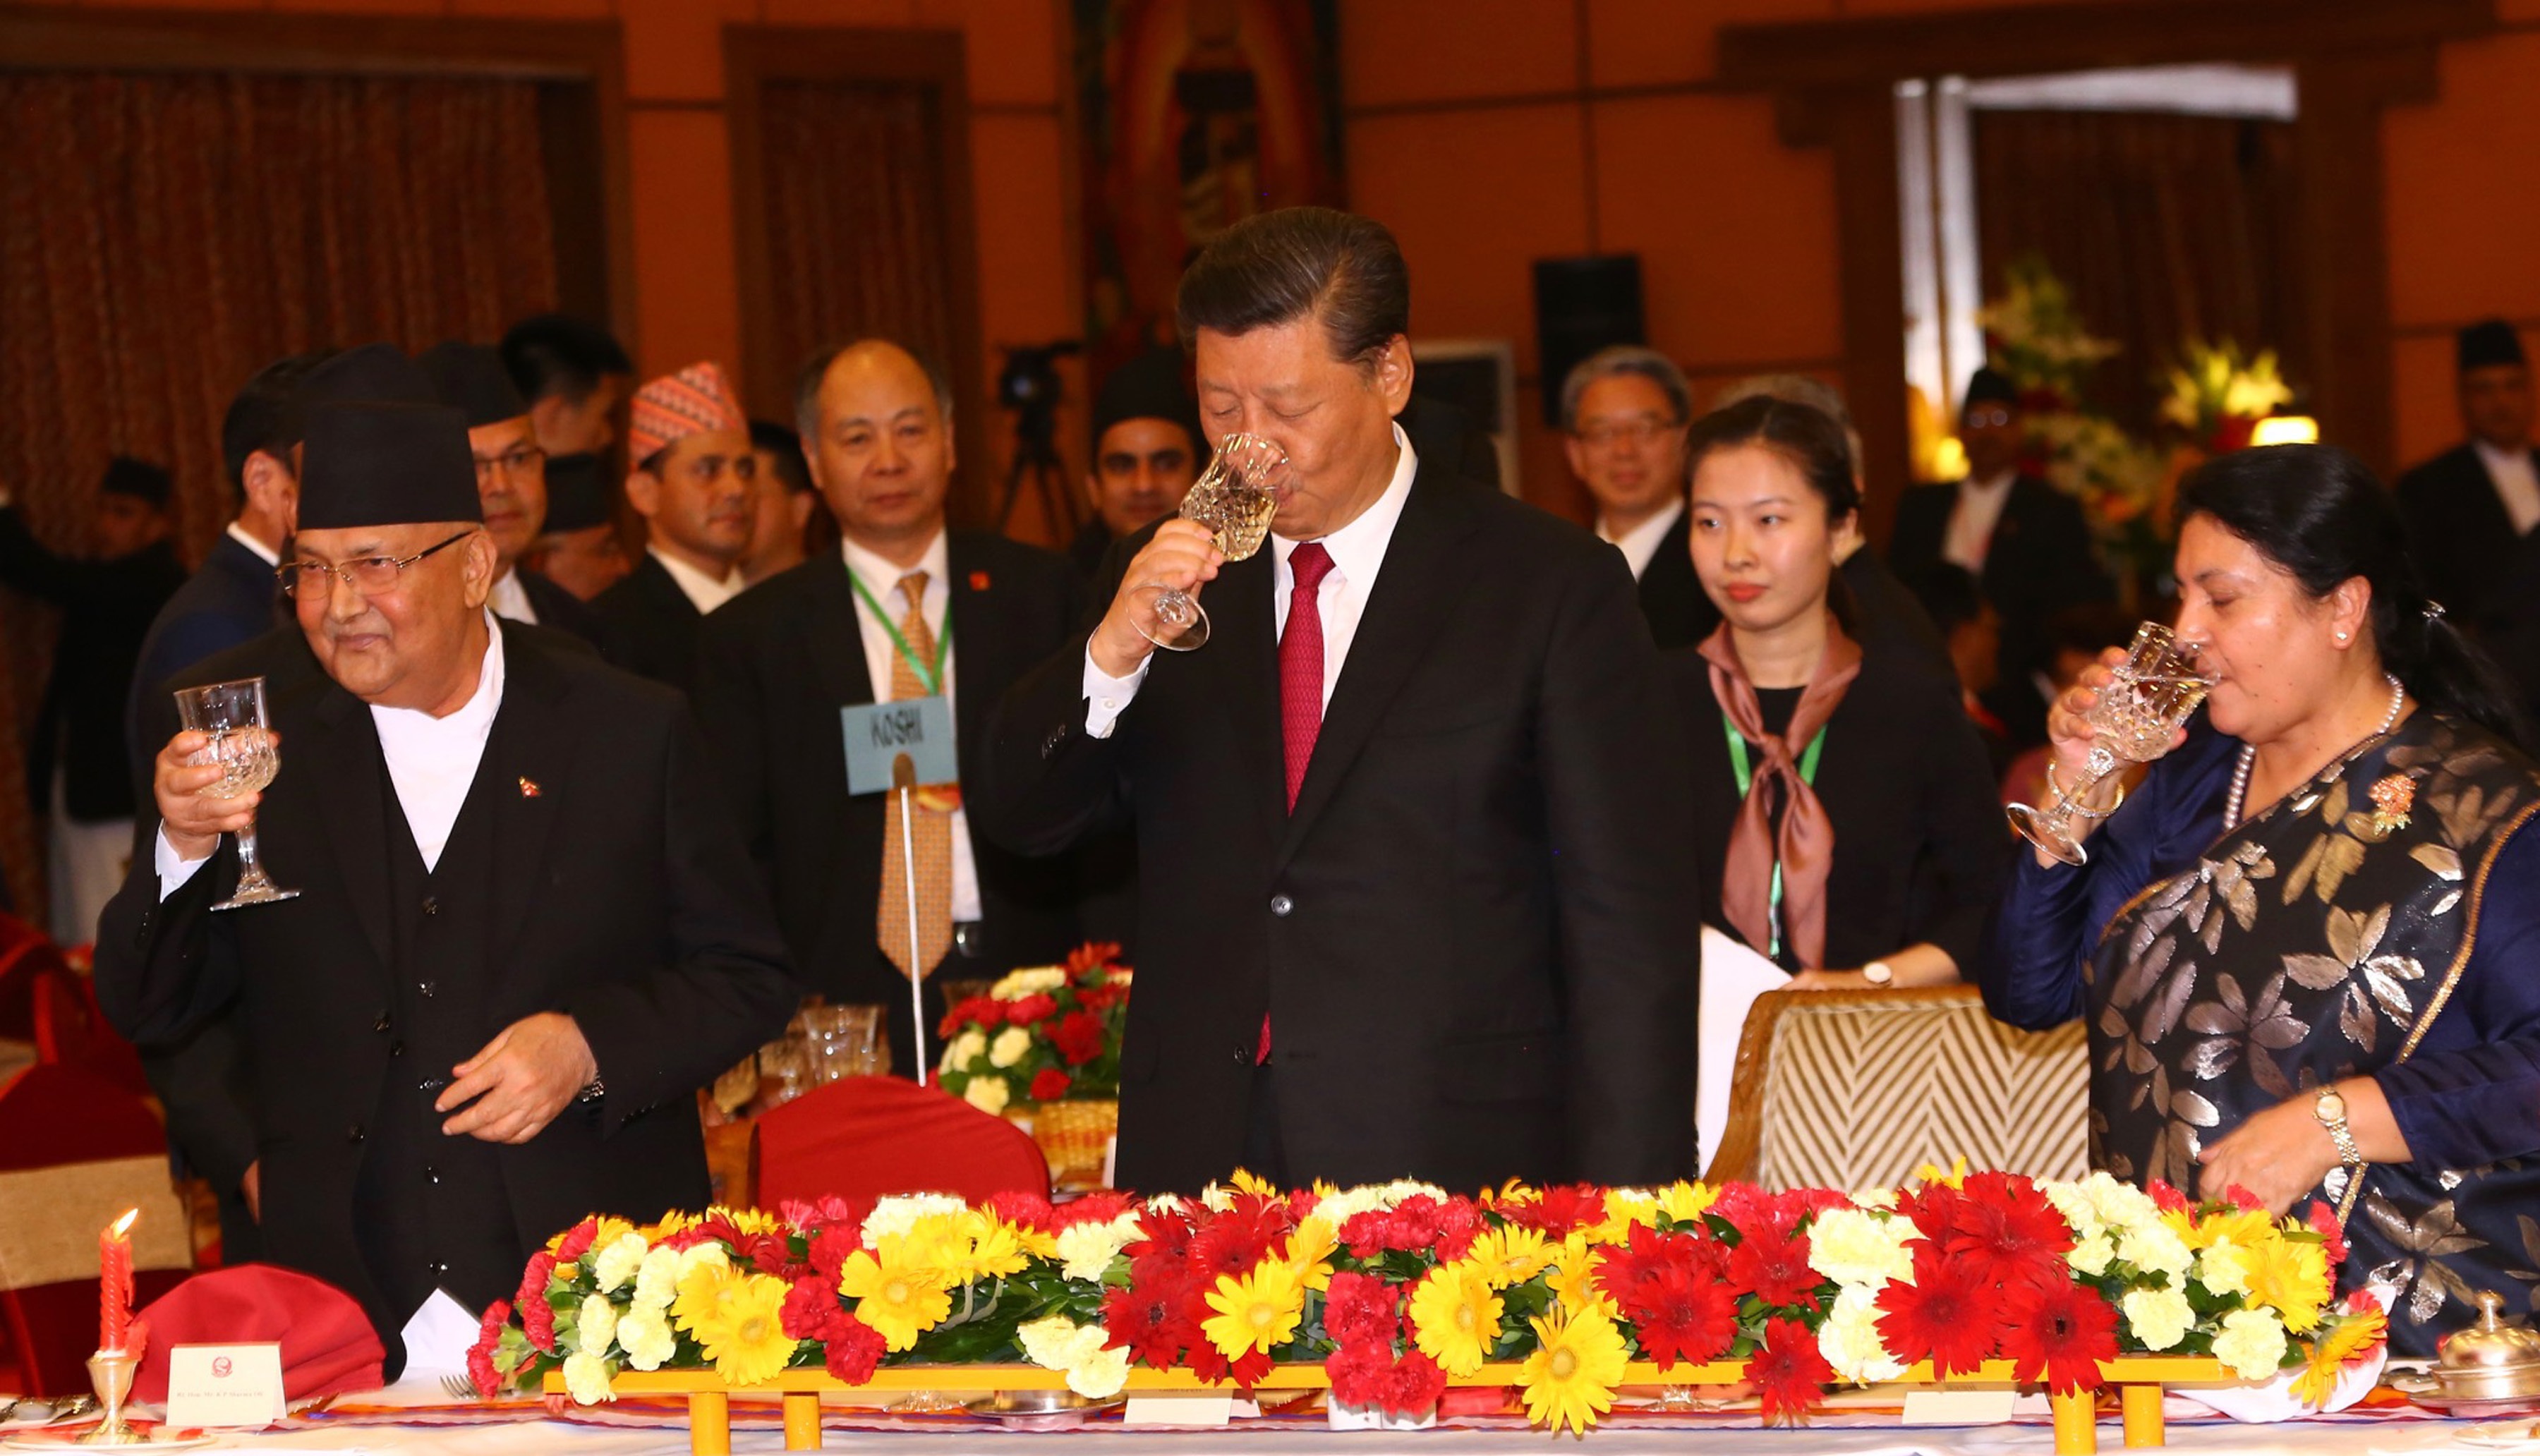 In pics: State banquet hosted in honor of Chinese President Xi